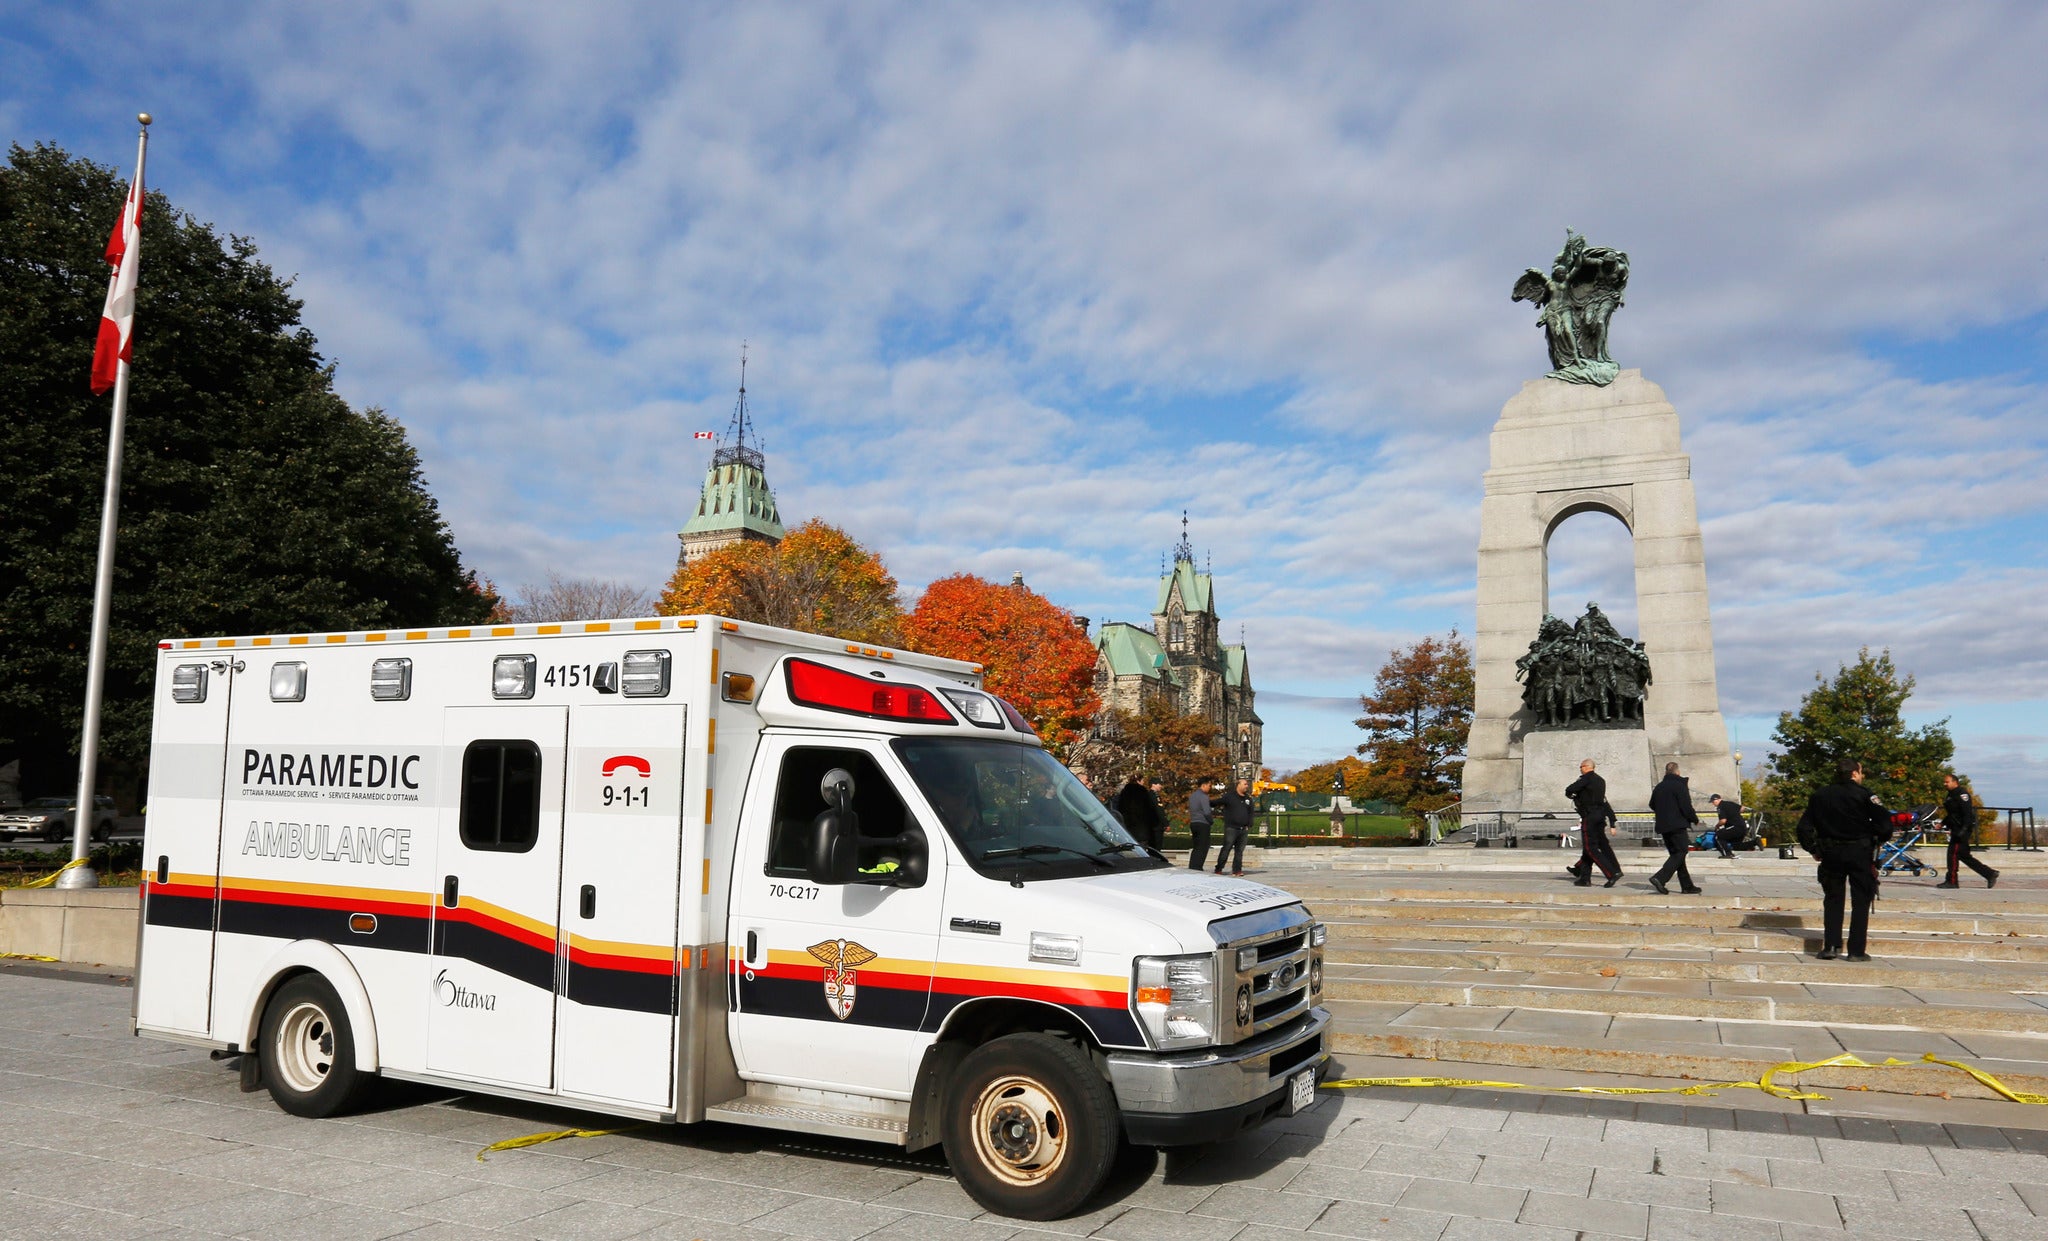 The soldier shot dead as he stood guard at Ottawa's National War Memorial has been named as Corporal Nathan Cirillo